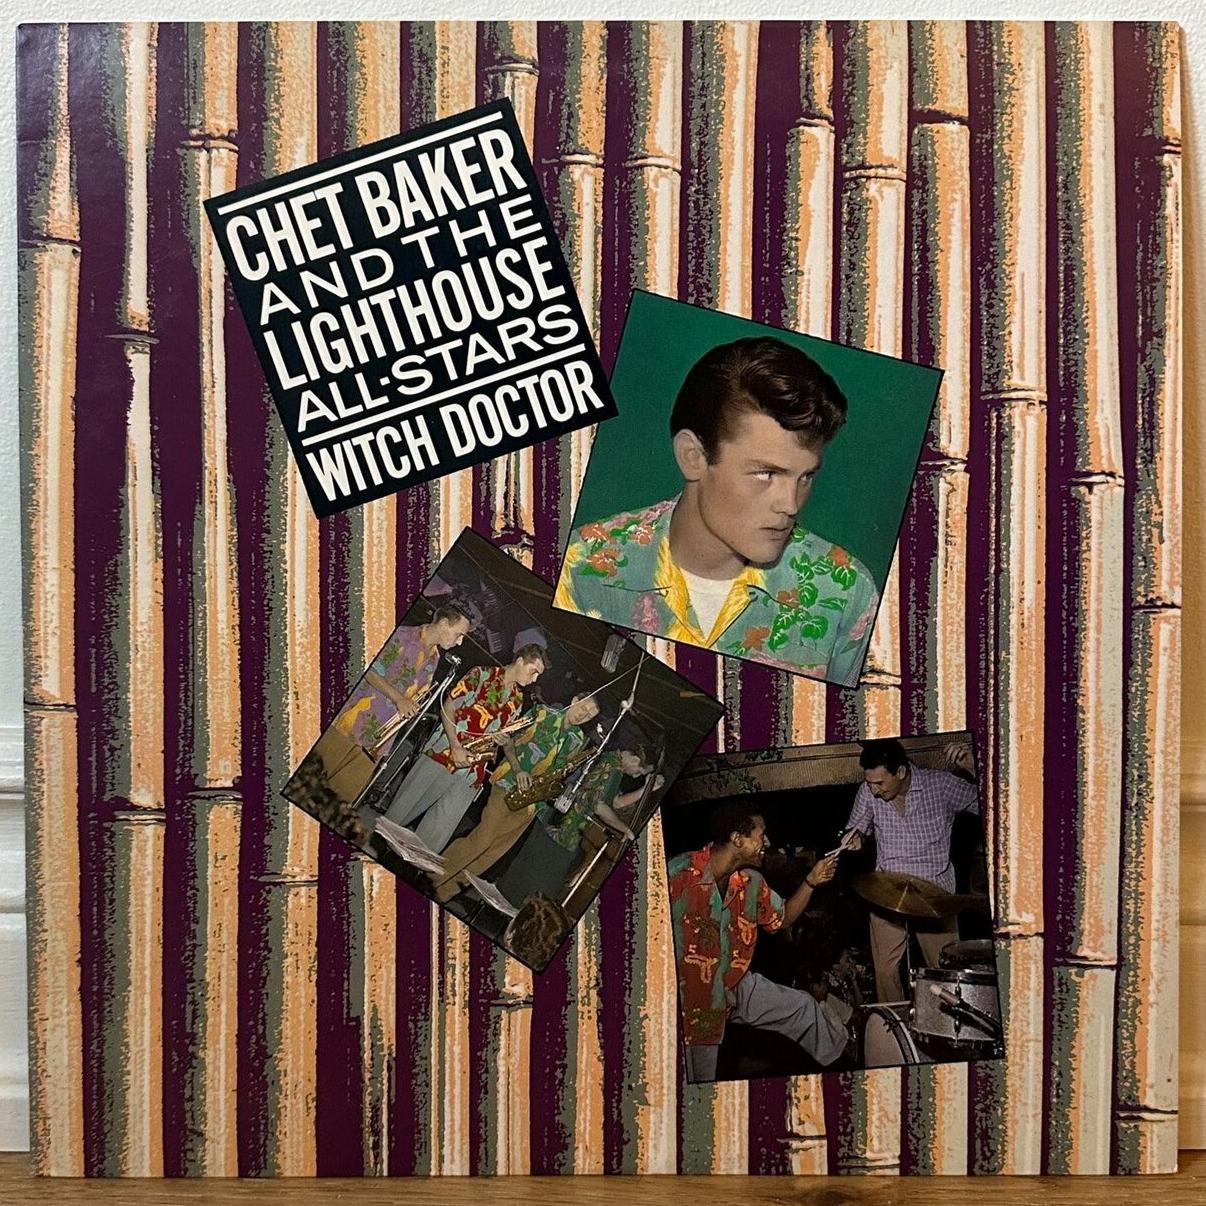 Chet Baker And The Lighthouse All-Stars - Witch Doctor - 1985